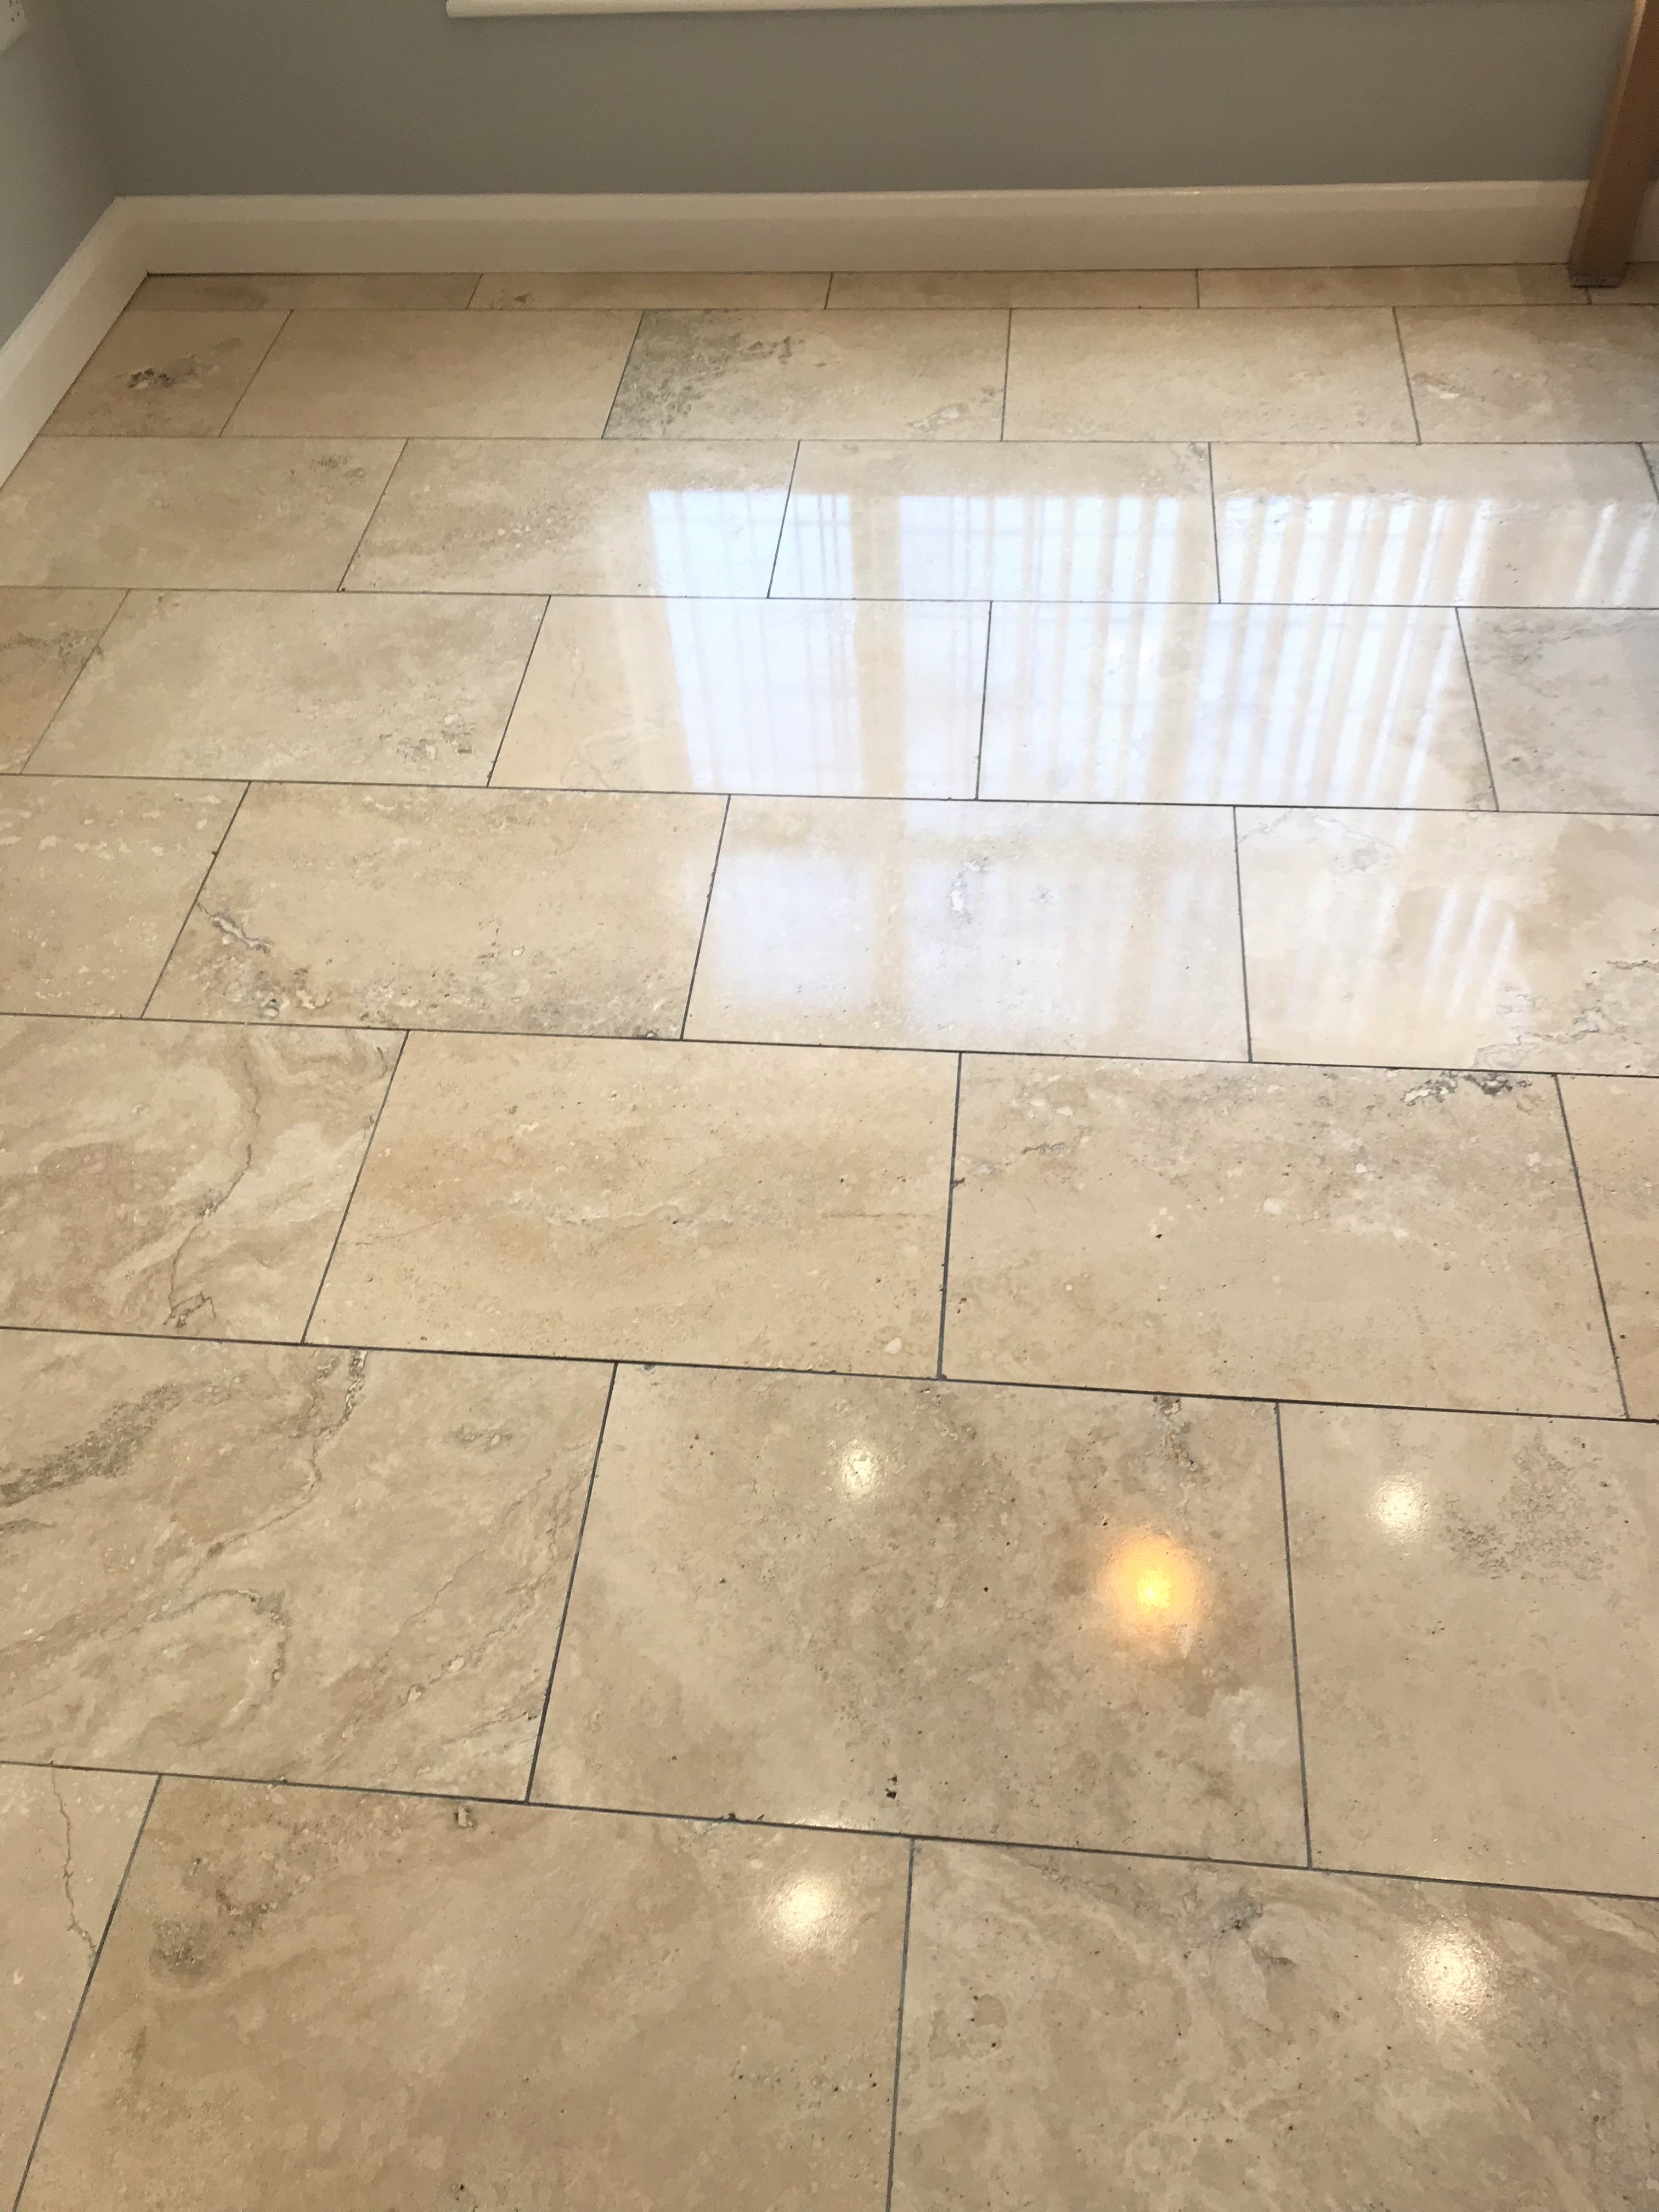 Travertine Kitchen Floor Tiles After Cleaning Stoke-on-Trent